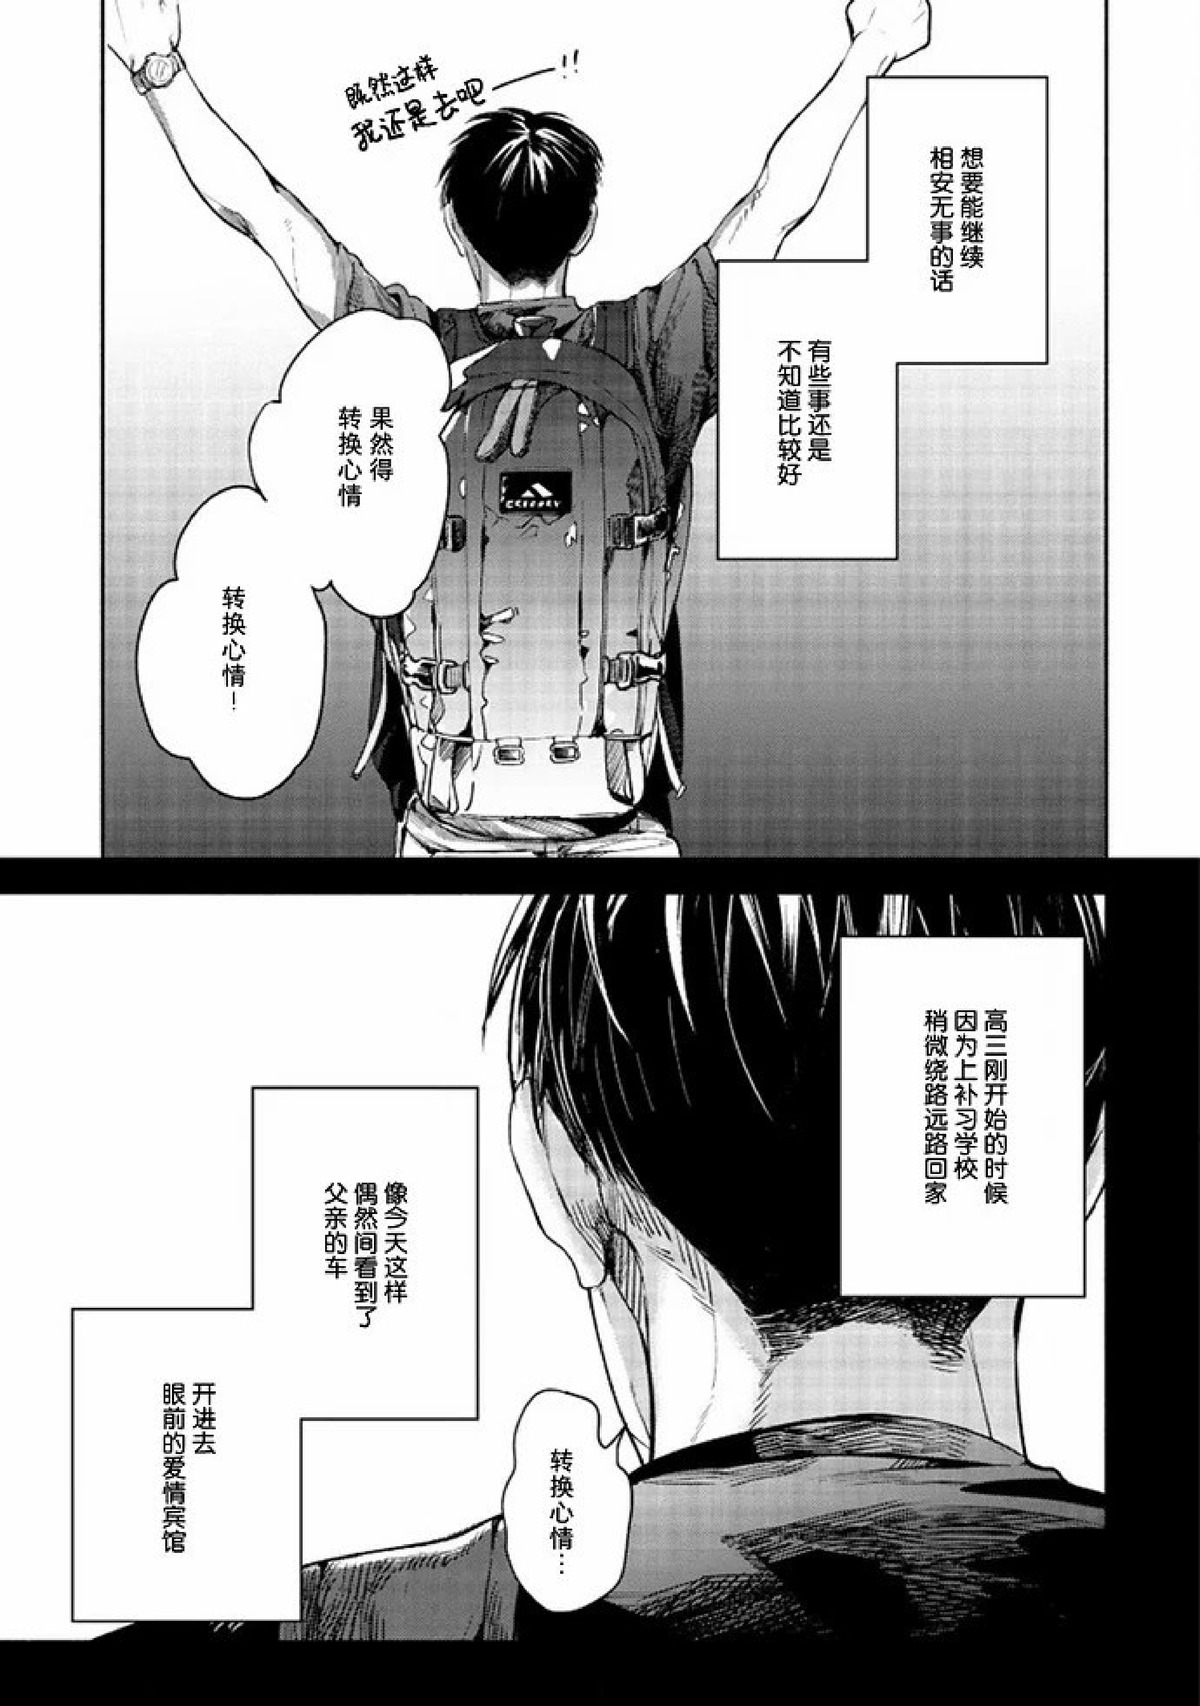 【Two sides of the same coin[耽美]】漫画-（上卷01-02）章节漫画下拉式图片-31.jpg